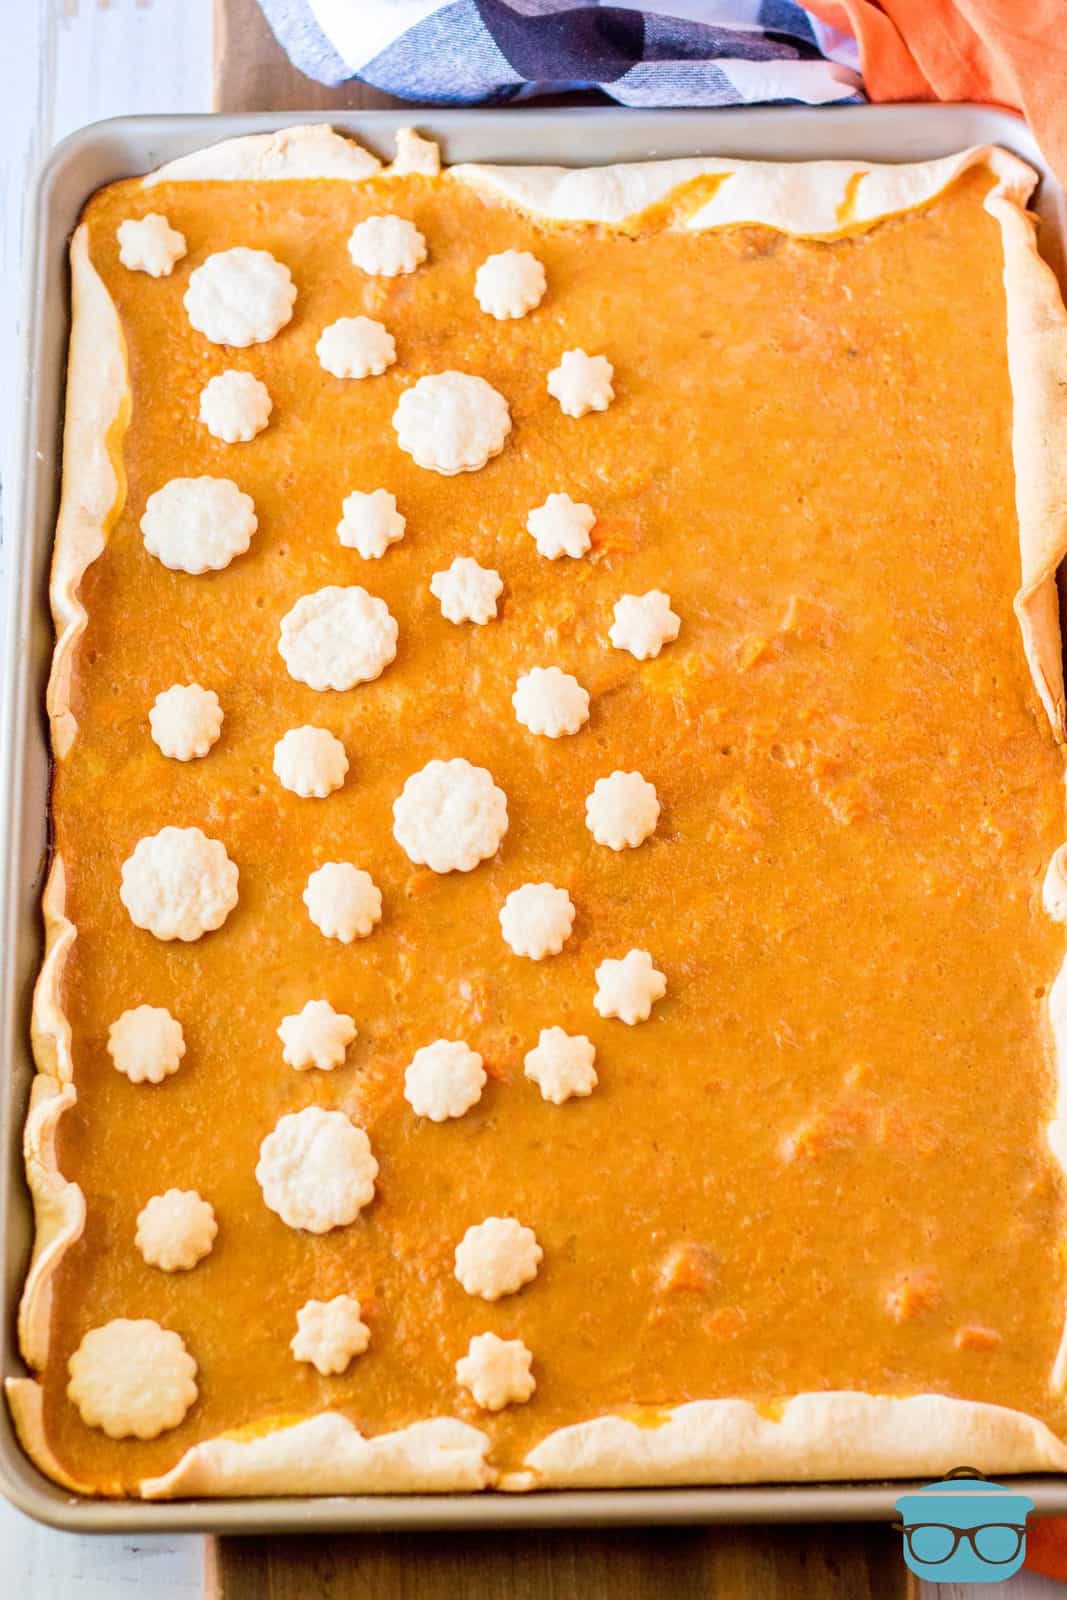 Finished Sweet Potato Slab Pie in pan with pie crust decorations.